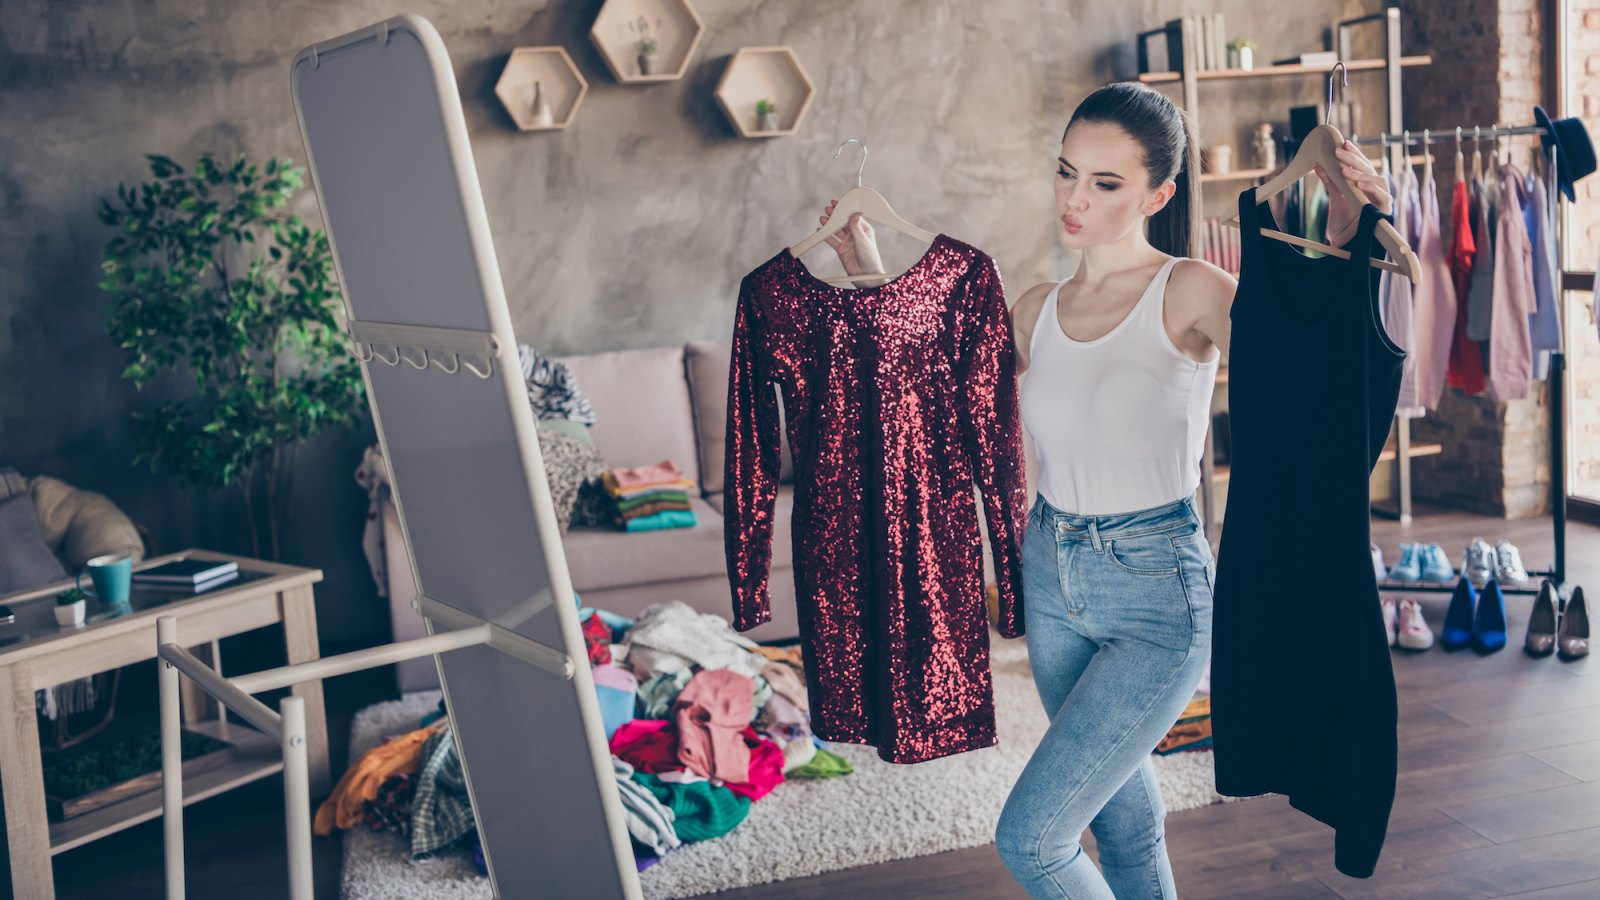 Woman-Getting-Dressed-Stock-Photo